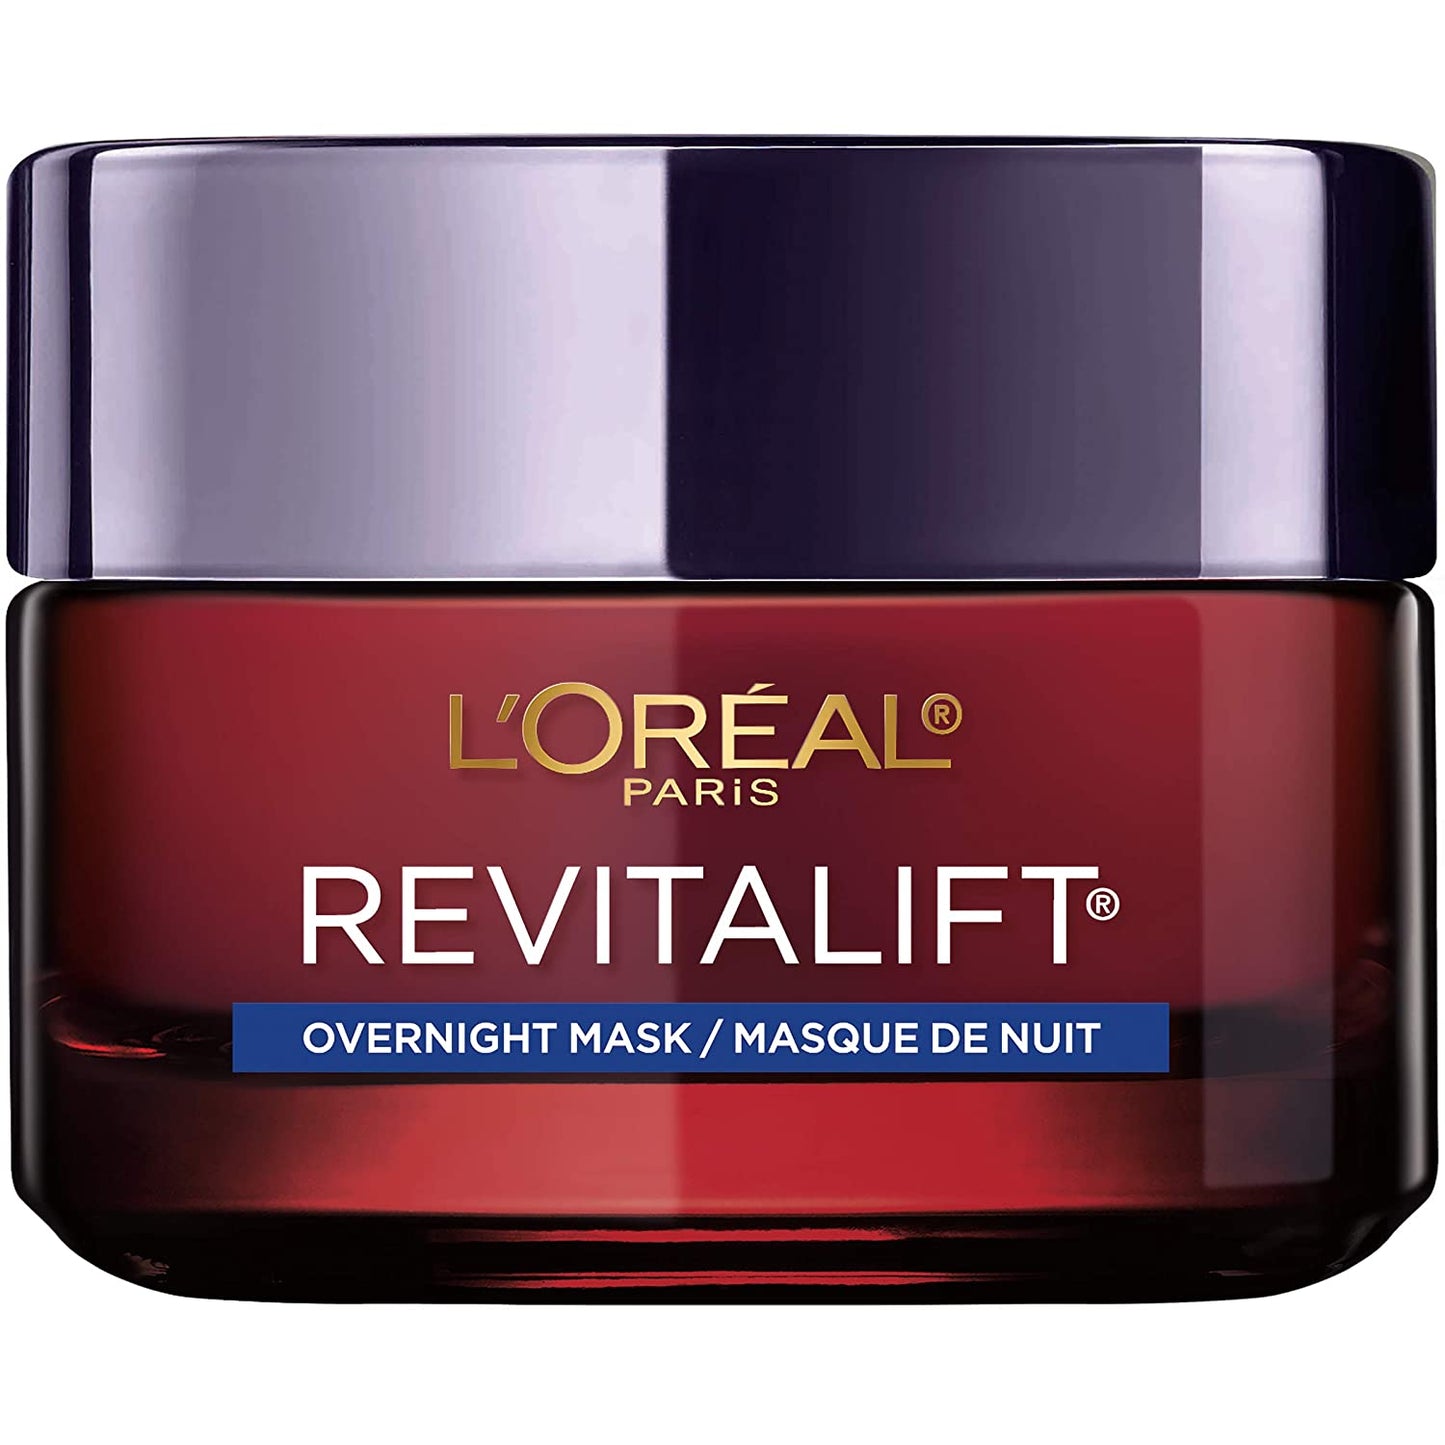 LOreal Revitalift Triple Power Intensive Overnight Face Mask with Pro Retinol, Vitamin C and Hyaluronic Acid, 1.7 oz. / 48g